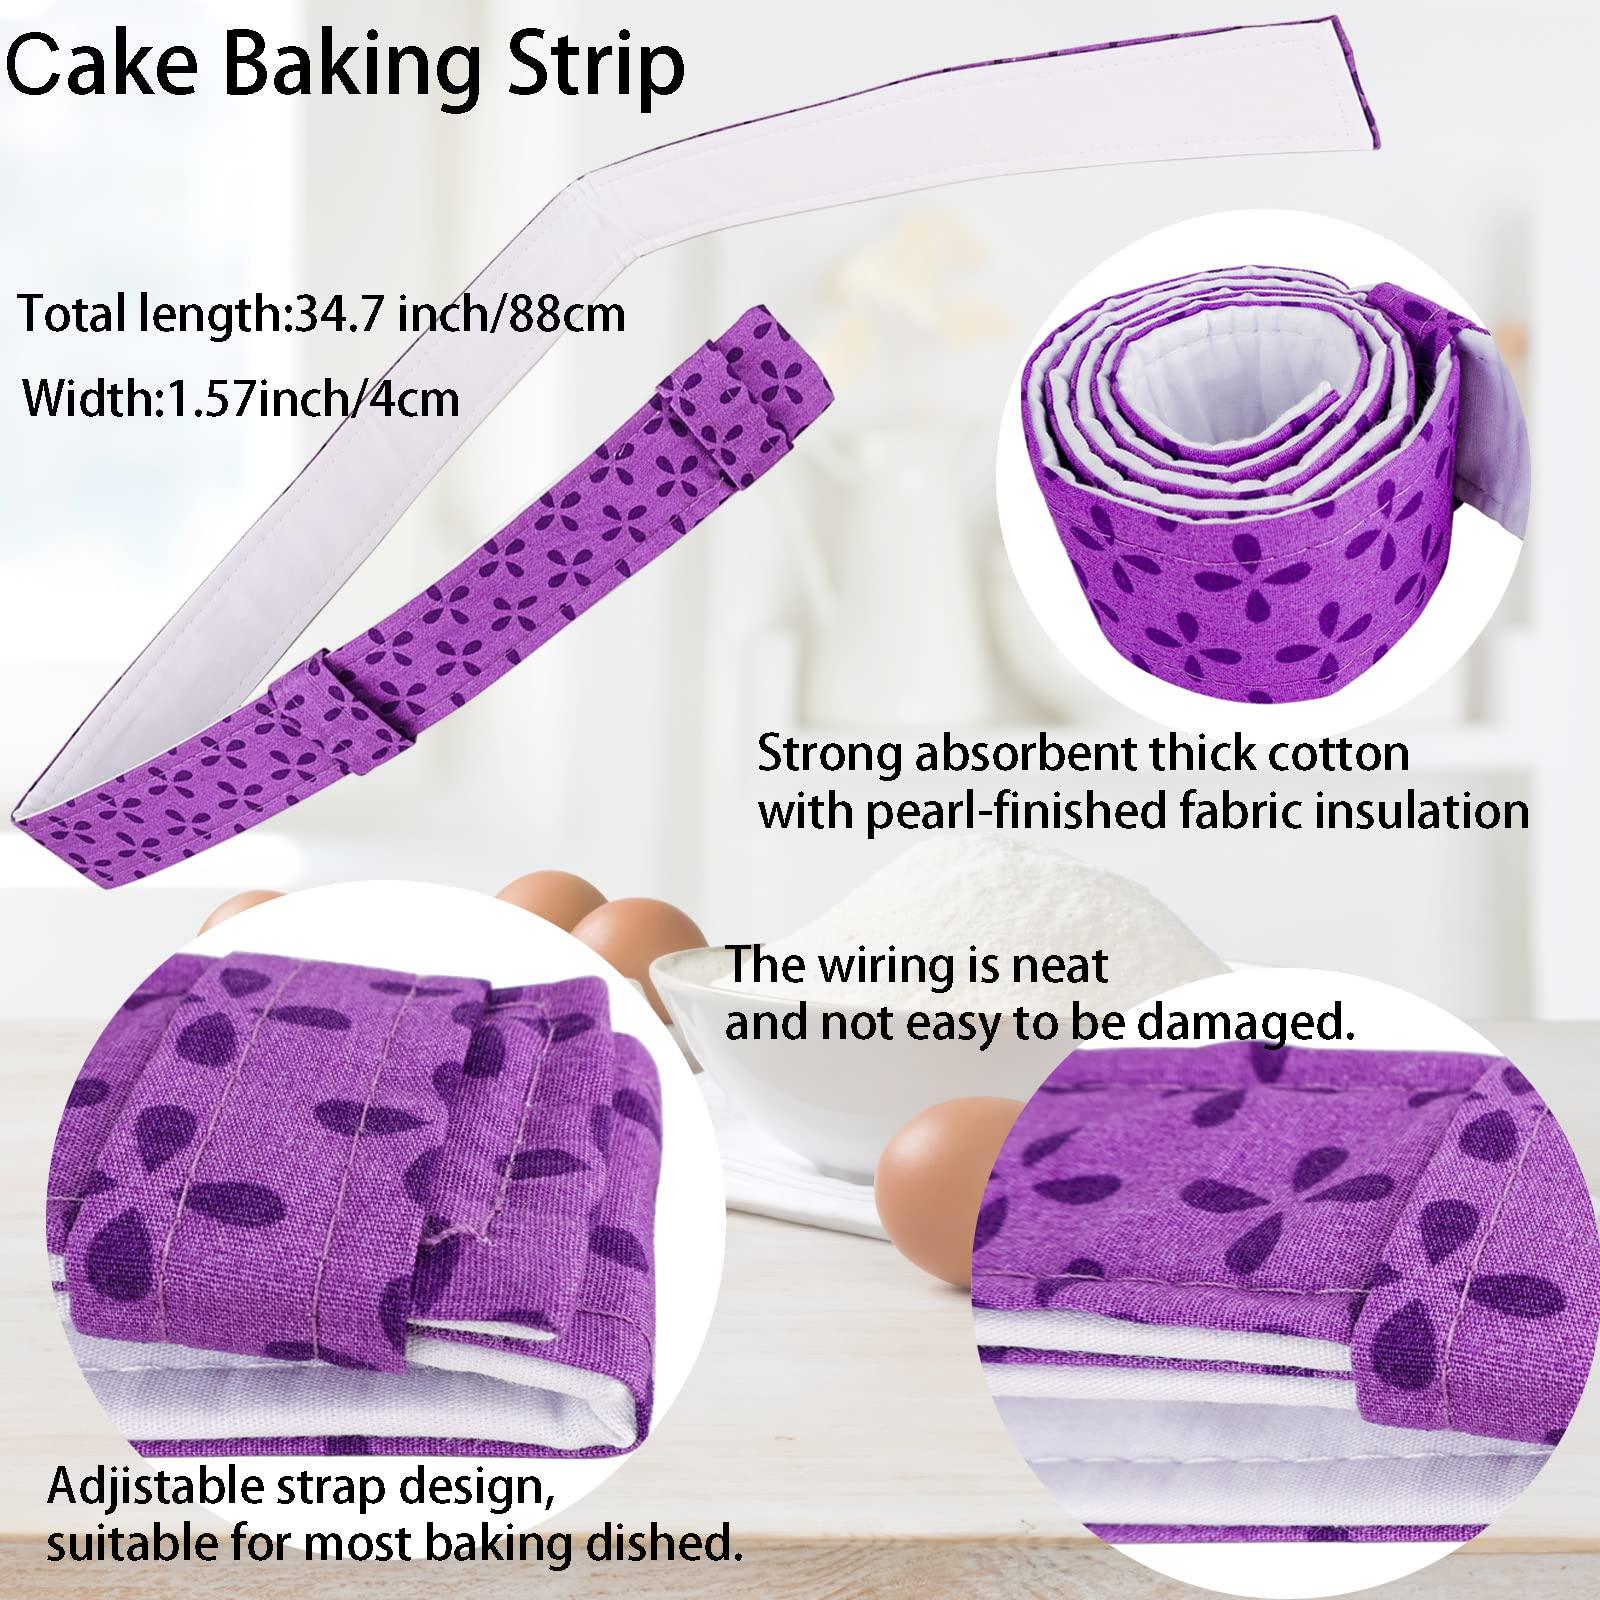 Winerming 4-Piece Bake Even Strip,Cake Pan Strips,Cake Pan Dampen Strips,Cake Pan Strips, Super Absorbent Thick Cotton,Keeps Cakes More Level and Prevents Crowning with Cleaner Edges - CookCave